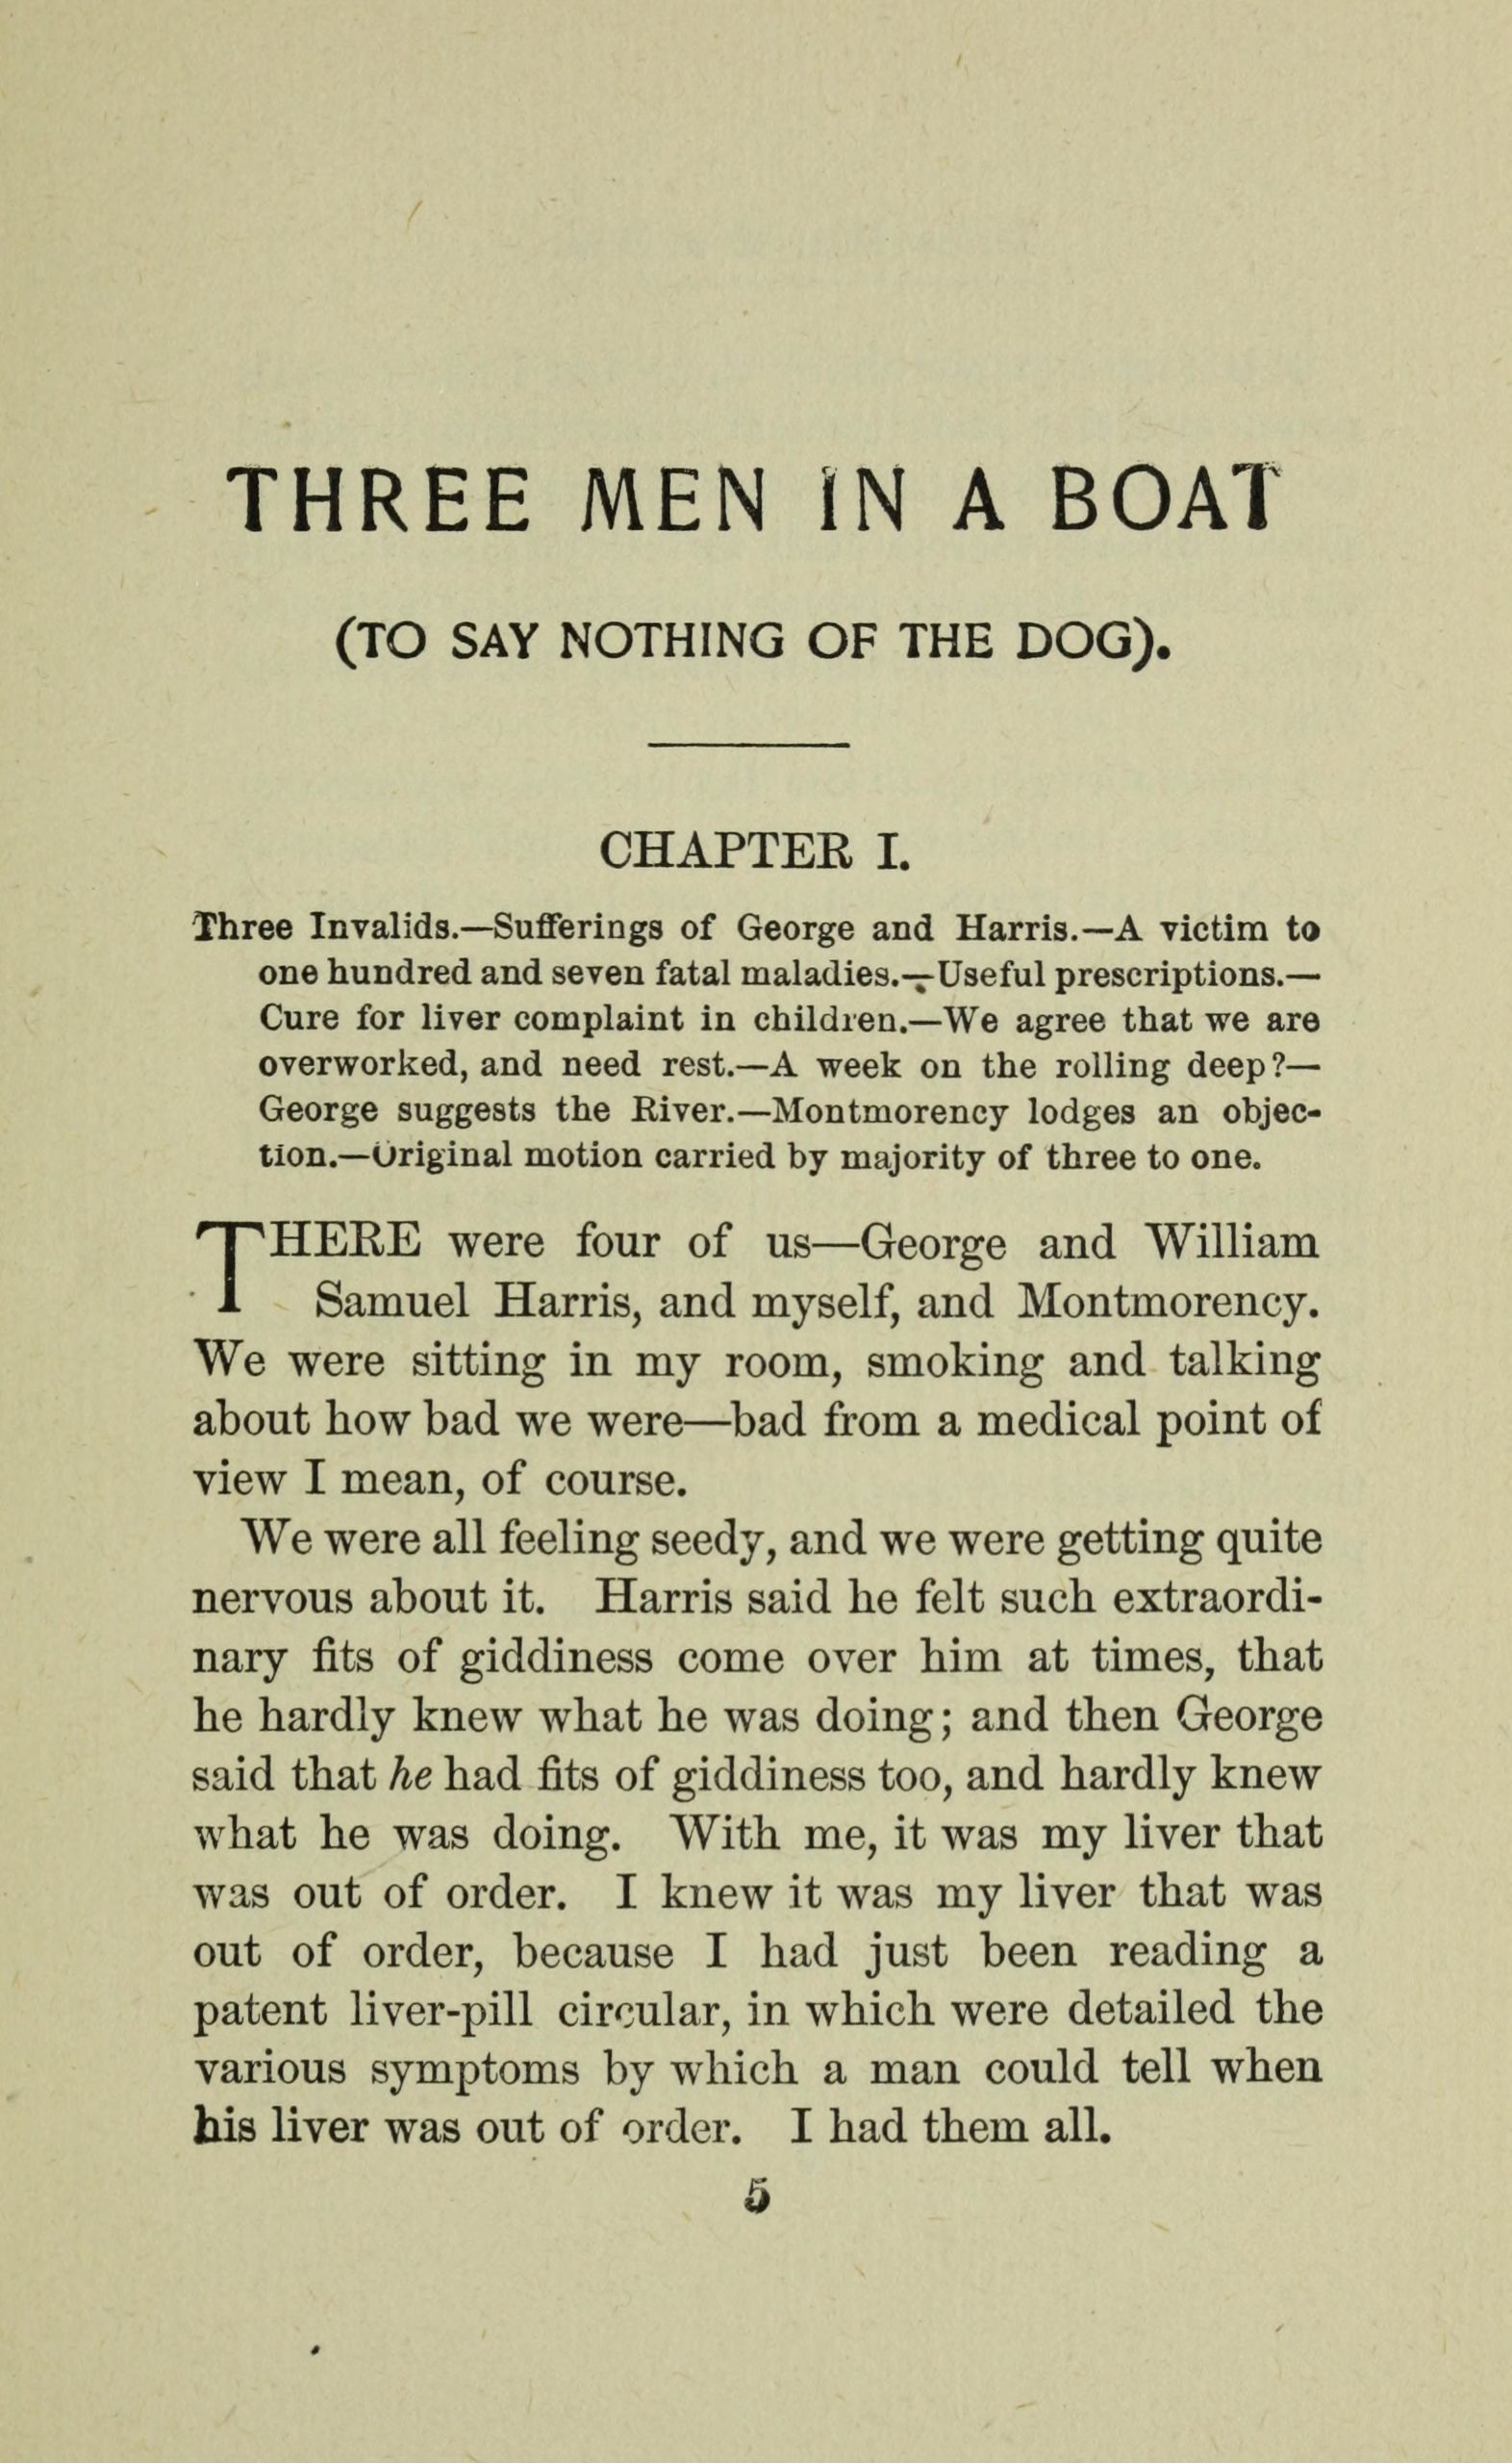 A large heading reading "Three Men in a Boat (To Say Nothing of the Dog)" above the heading "Chapter 1", followed by:
Three invalids.—Sufferings of George and Harris.—A victim to one hundred and seven fatal maladies.—Useful prescriptions.—Cure for liver complaint in children.—We agree that we are overworked, and need rest.—A week on the rolling deep?—George suggests the River.—Montmorency lodges an objection.—Original motion carried by majority of three to one.